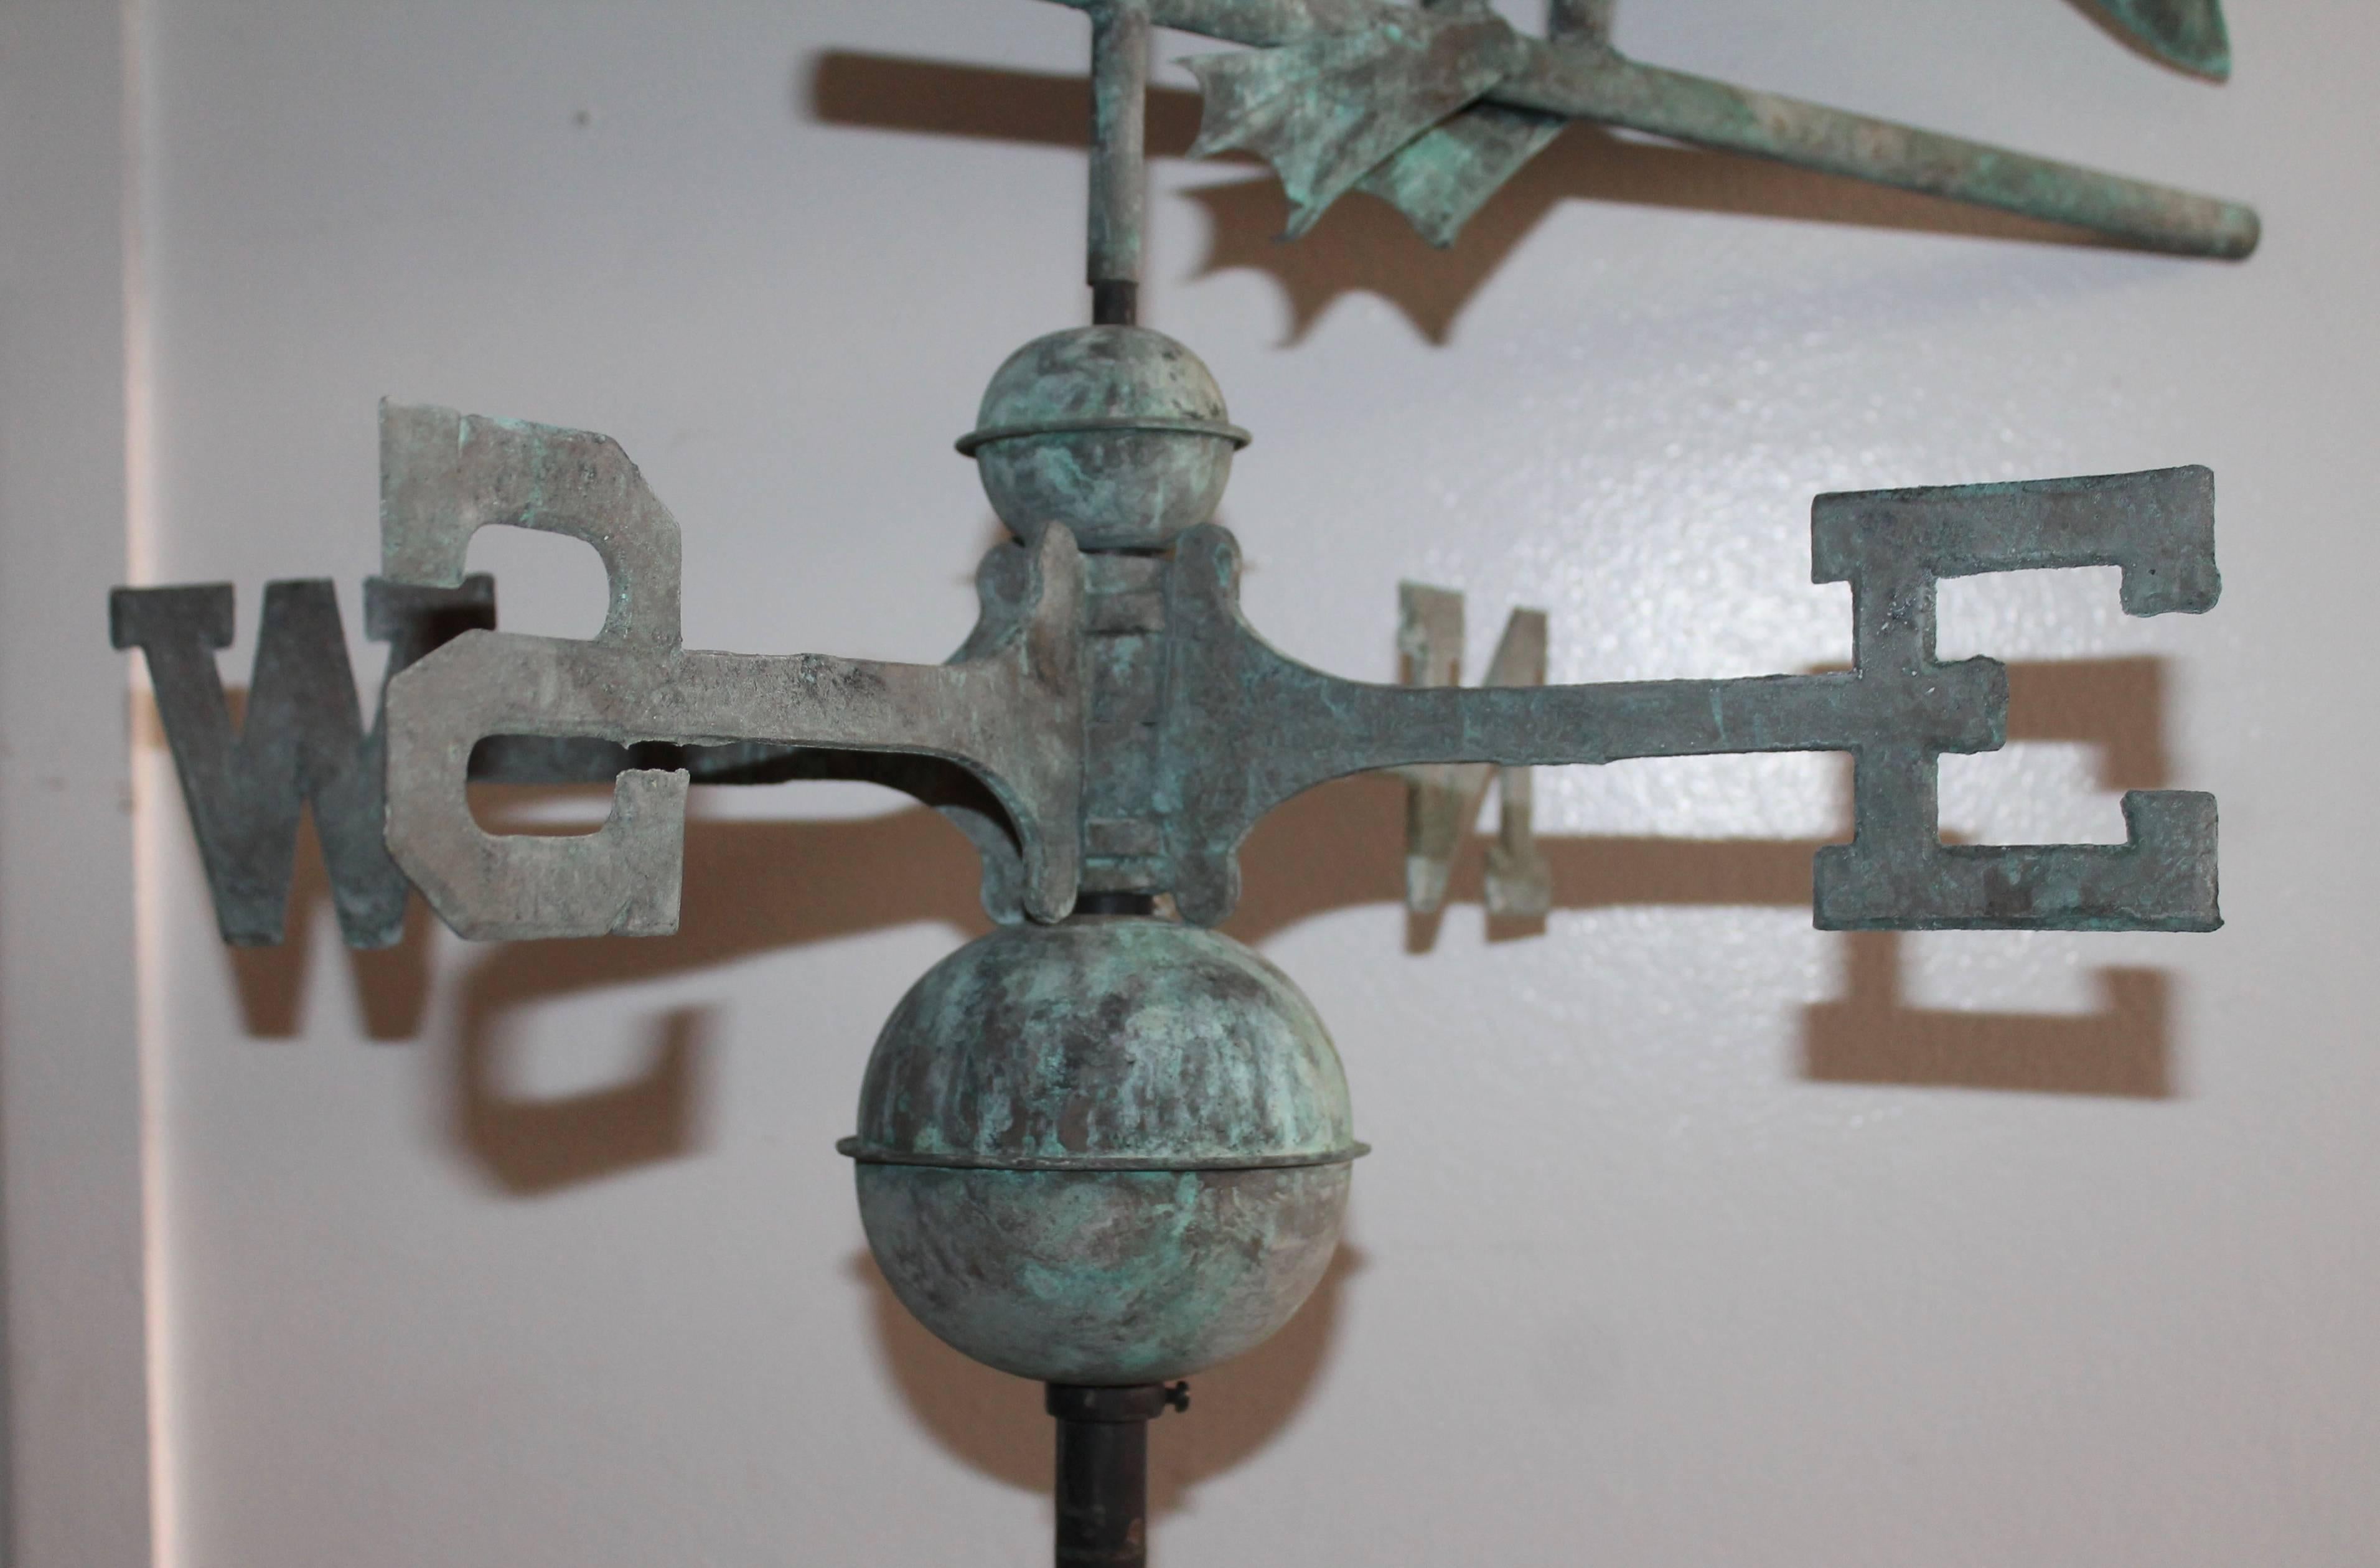 American Early 20th Century, Stork Weathervane with Original Directionals on Stand